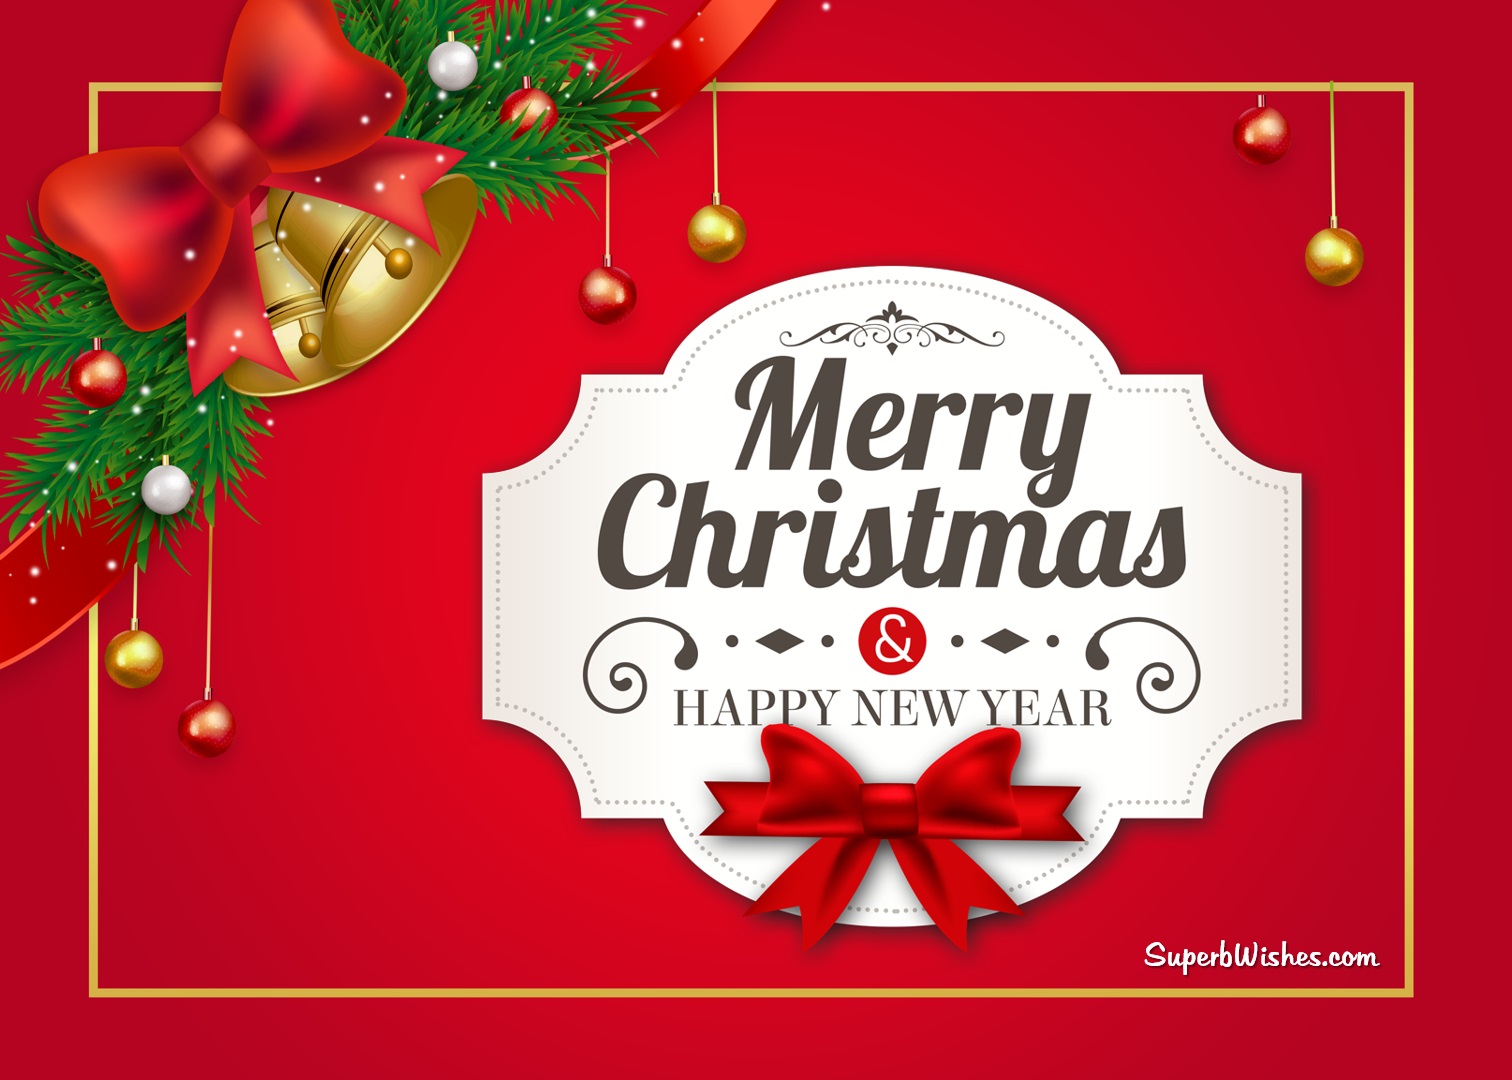 Image Of Merry Christmas And Happy New Year